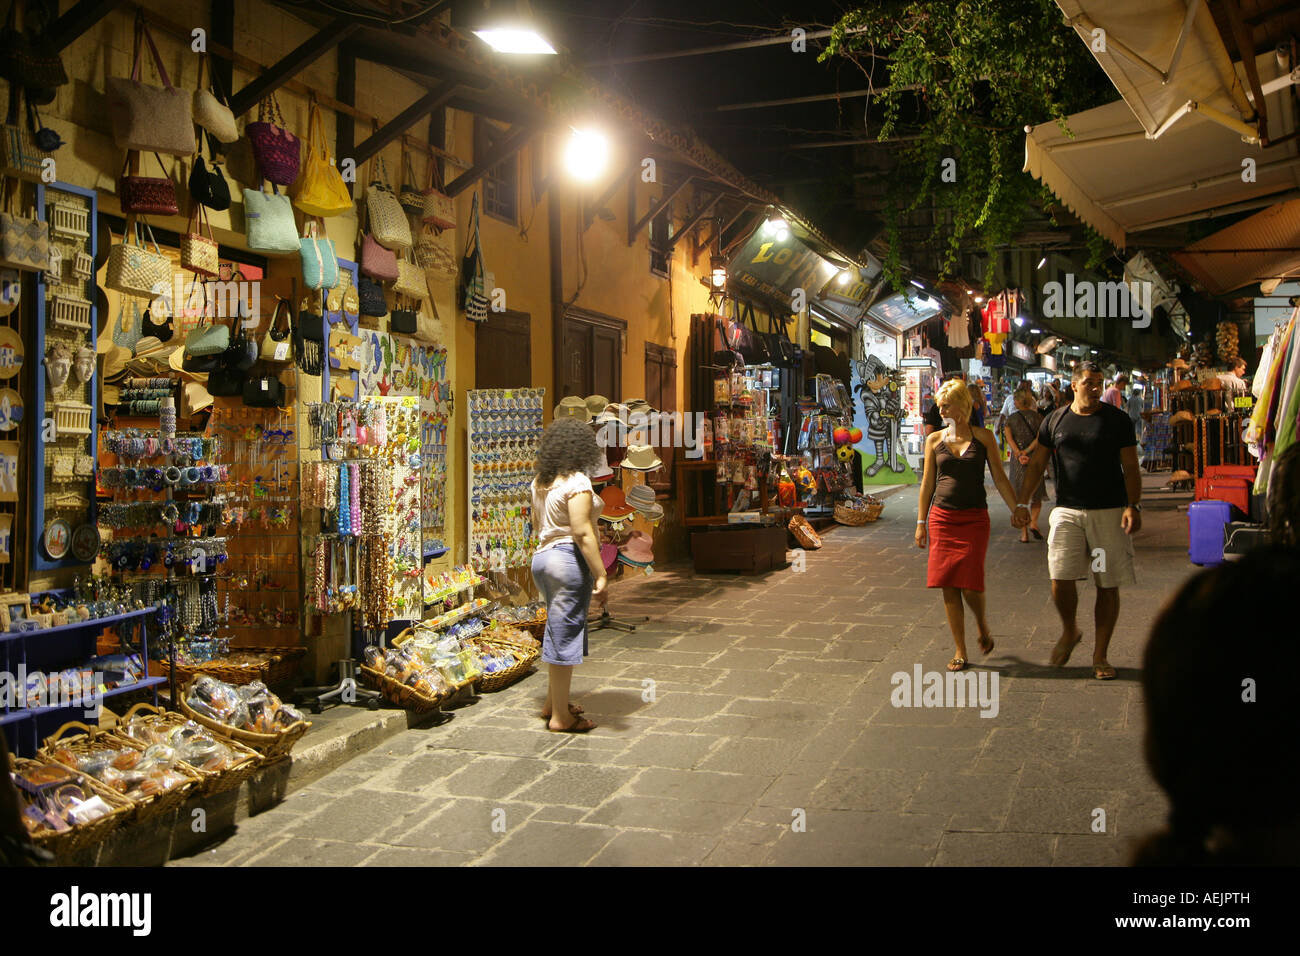 Souvenir shop in the oldtown of rhodes, Greece, Europe Stock Photo